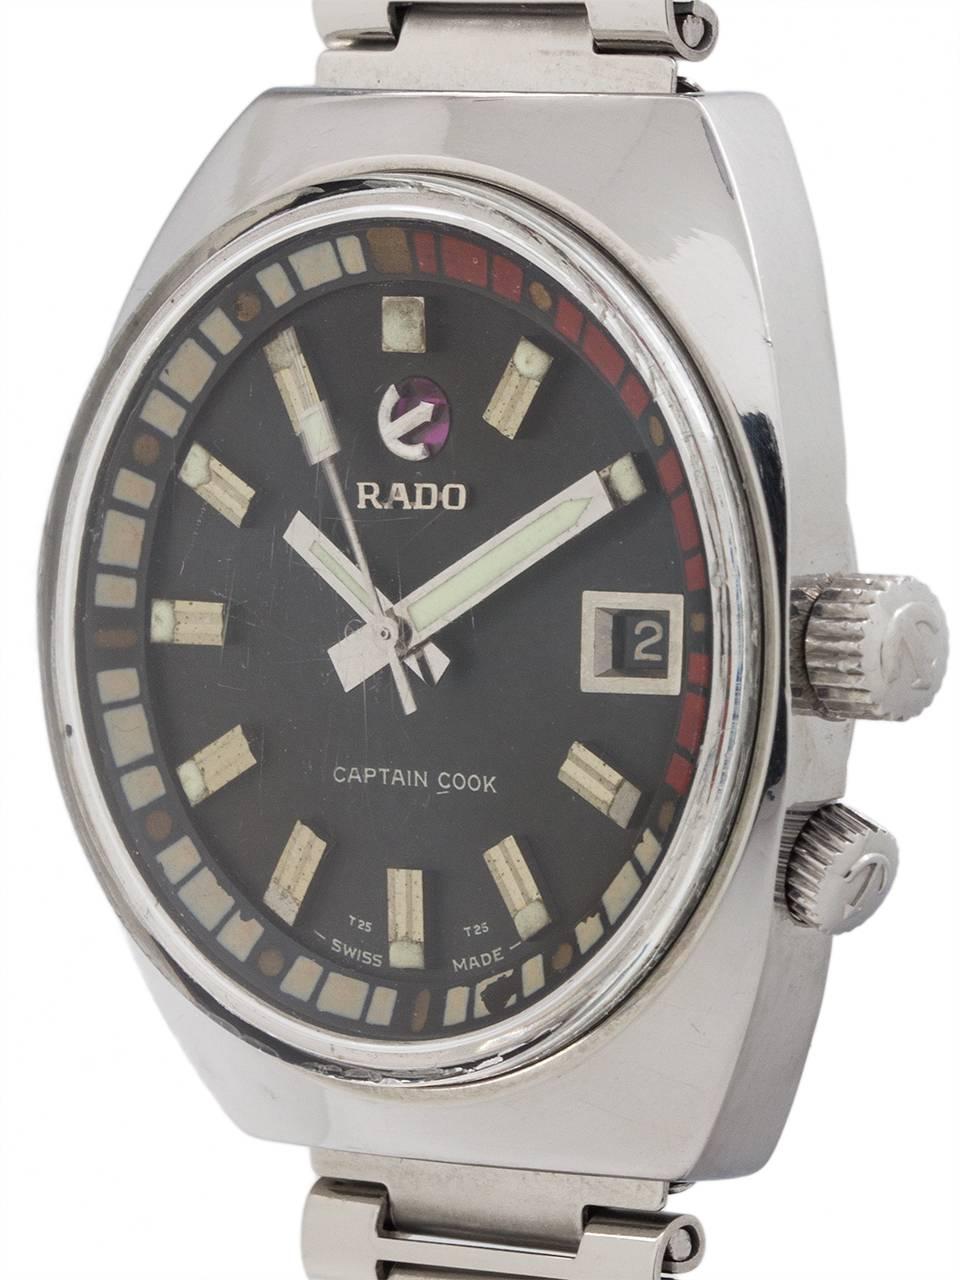 
Rado “Captain Cook” circa 1970's. Featuring a 40mm stainless steel bullhead shape case with acrylic crystal. Original black dial with swinging anchor affixed at 12 o'clock above “RADO”, with a black date window at 3 o'clock. Maybe the most